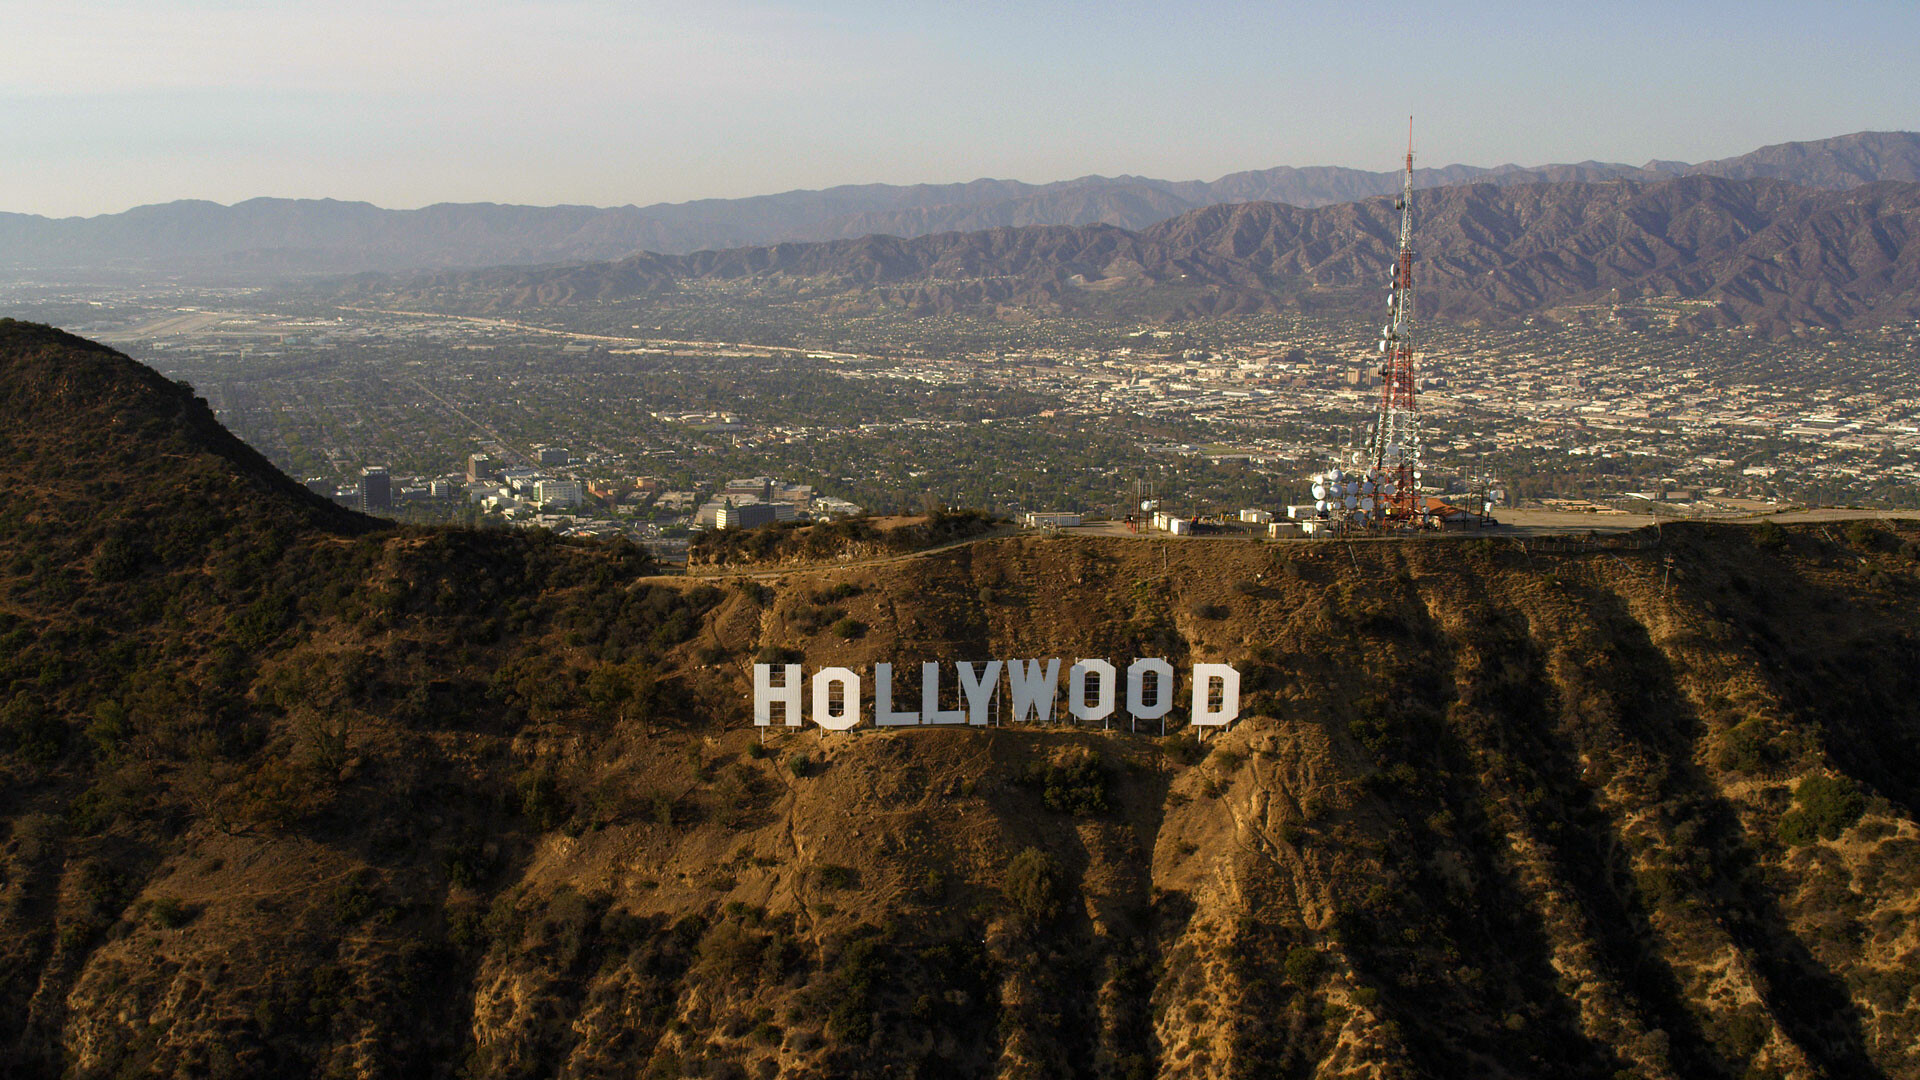 Hollywood Sign: An American landmark, overlooking Los Angeles, California. 1920x1080 Full HD Background.